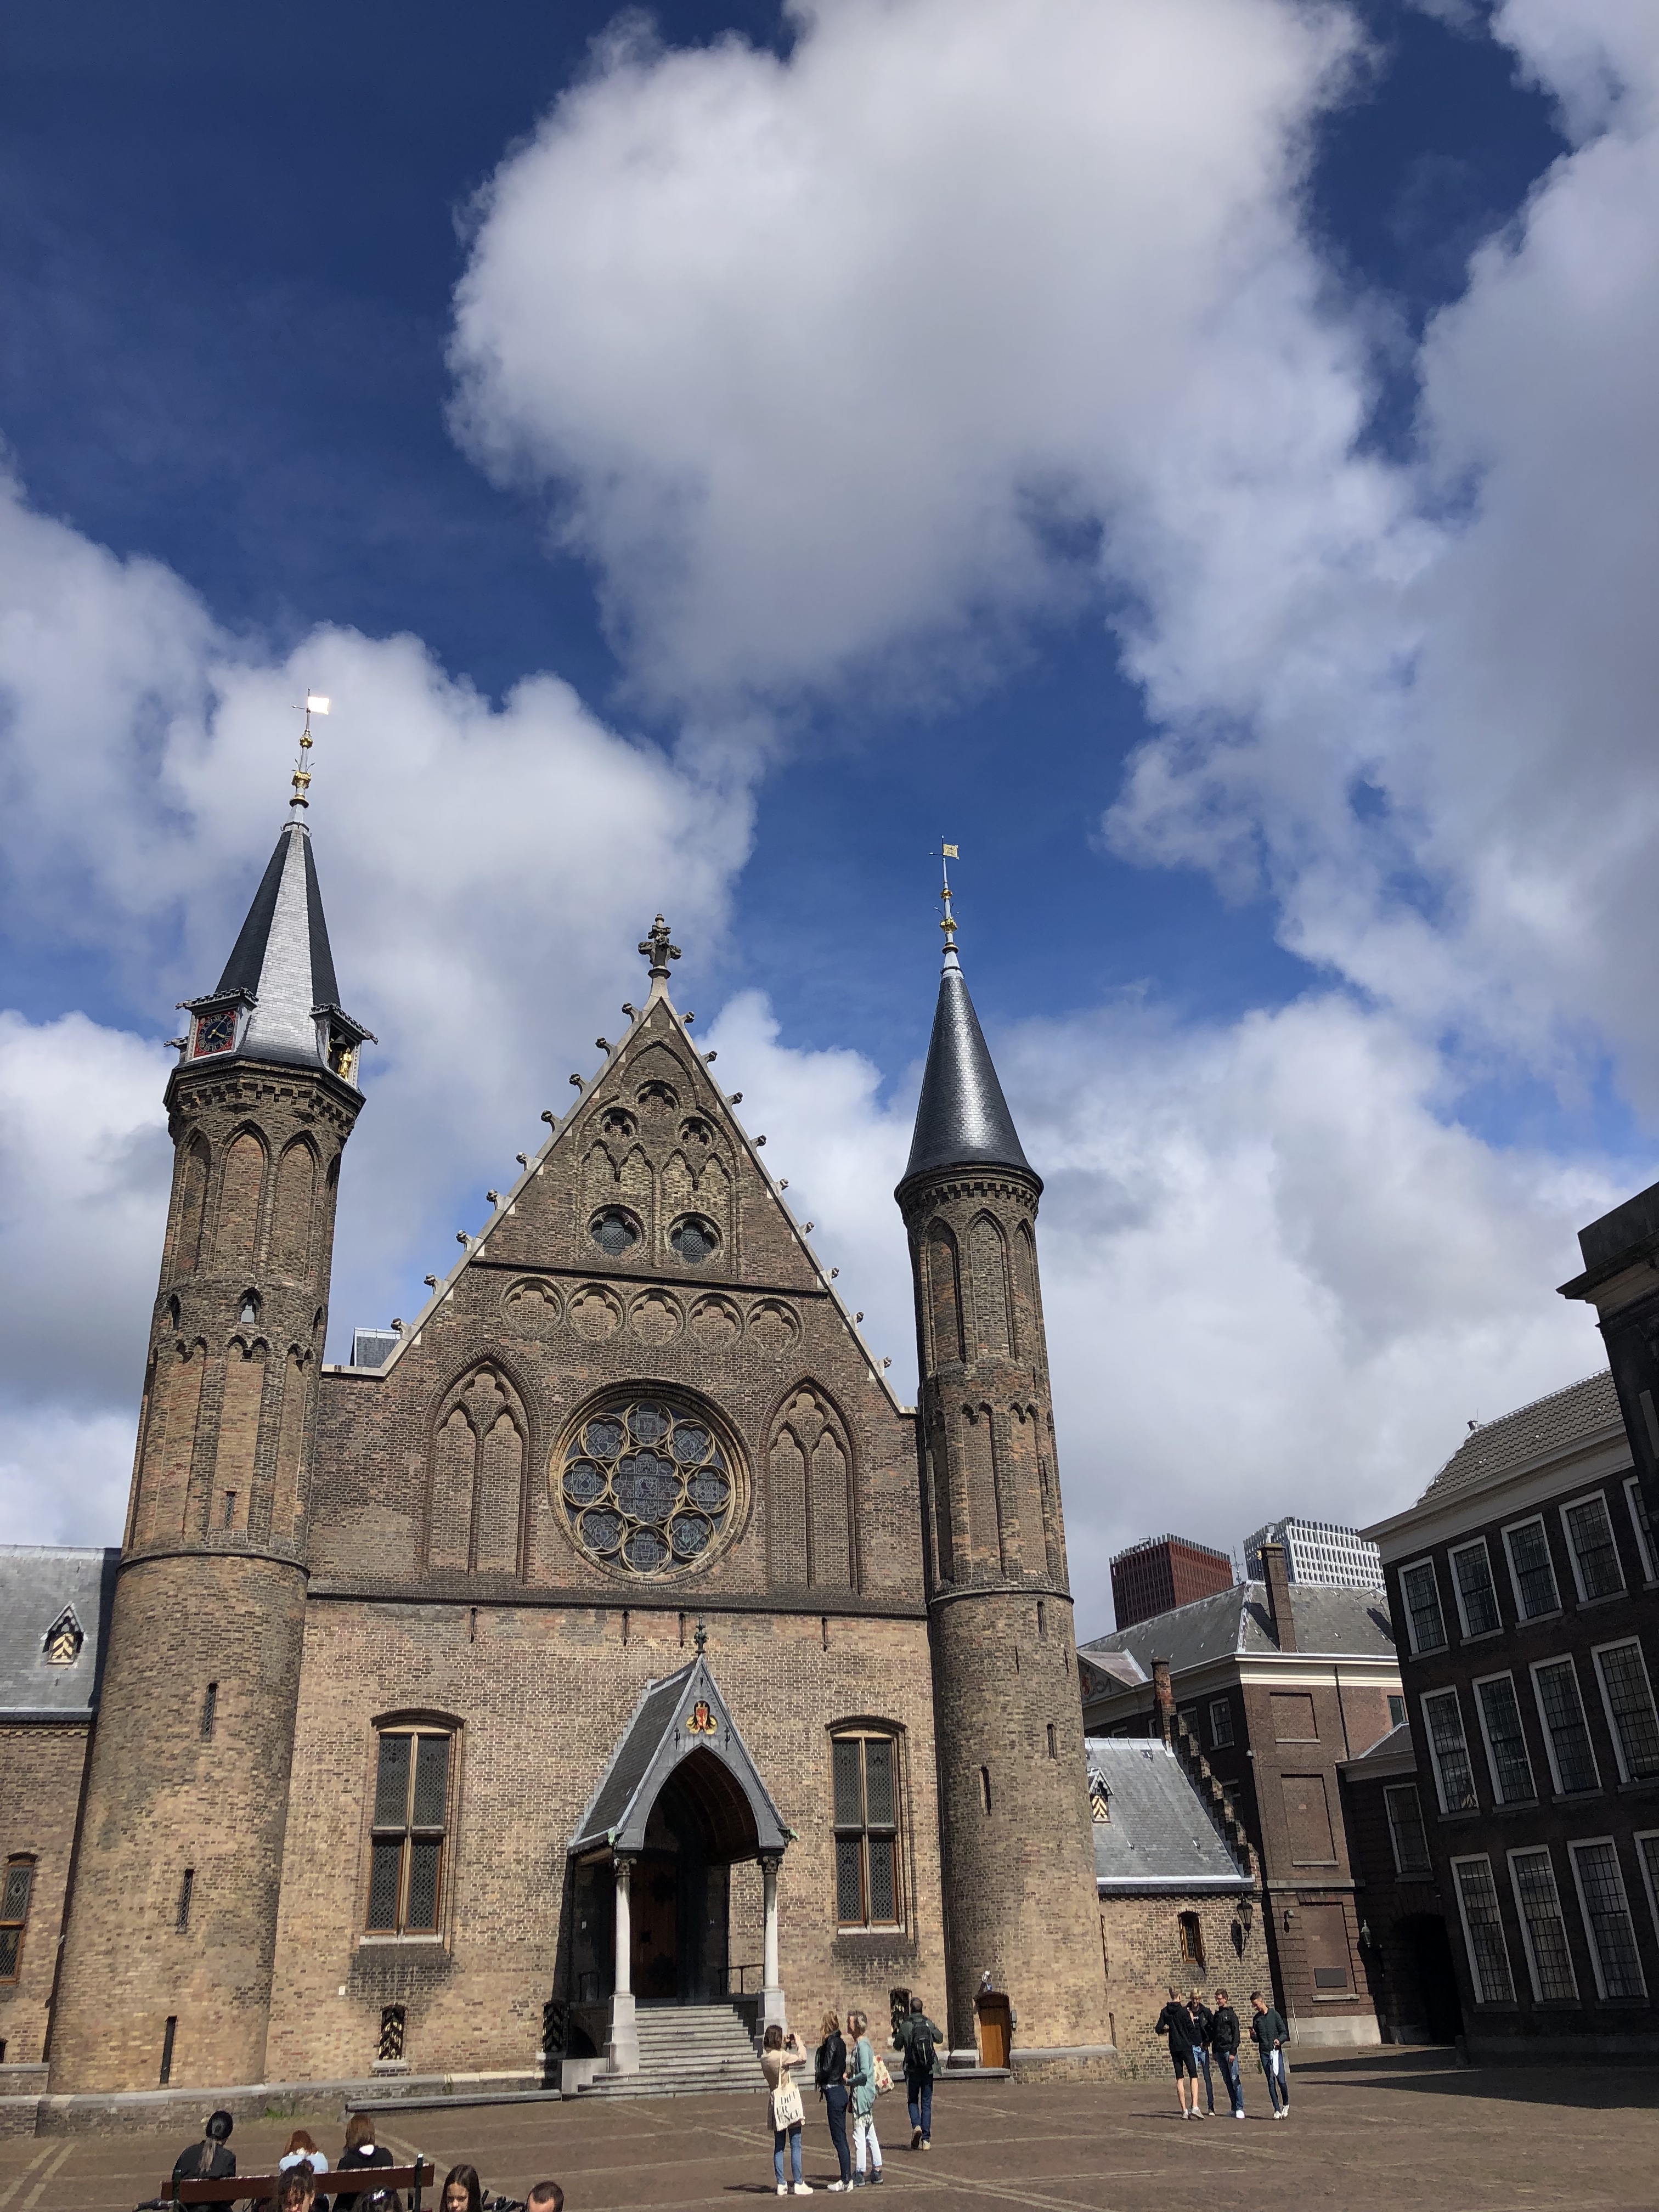 church in the hague with pretty blue skies